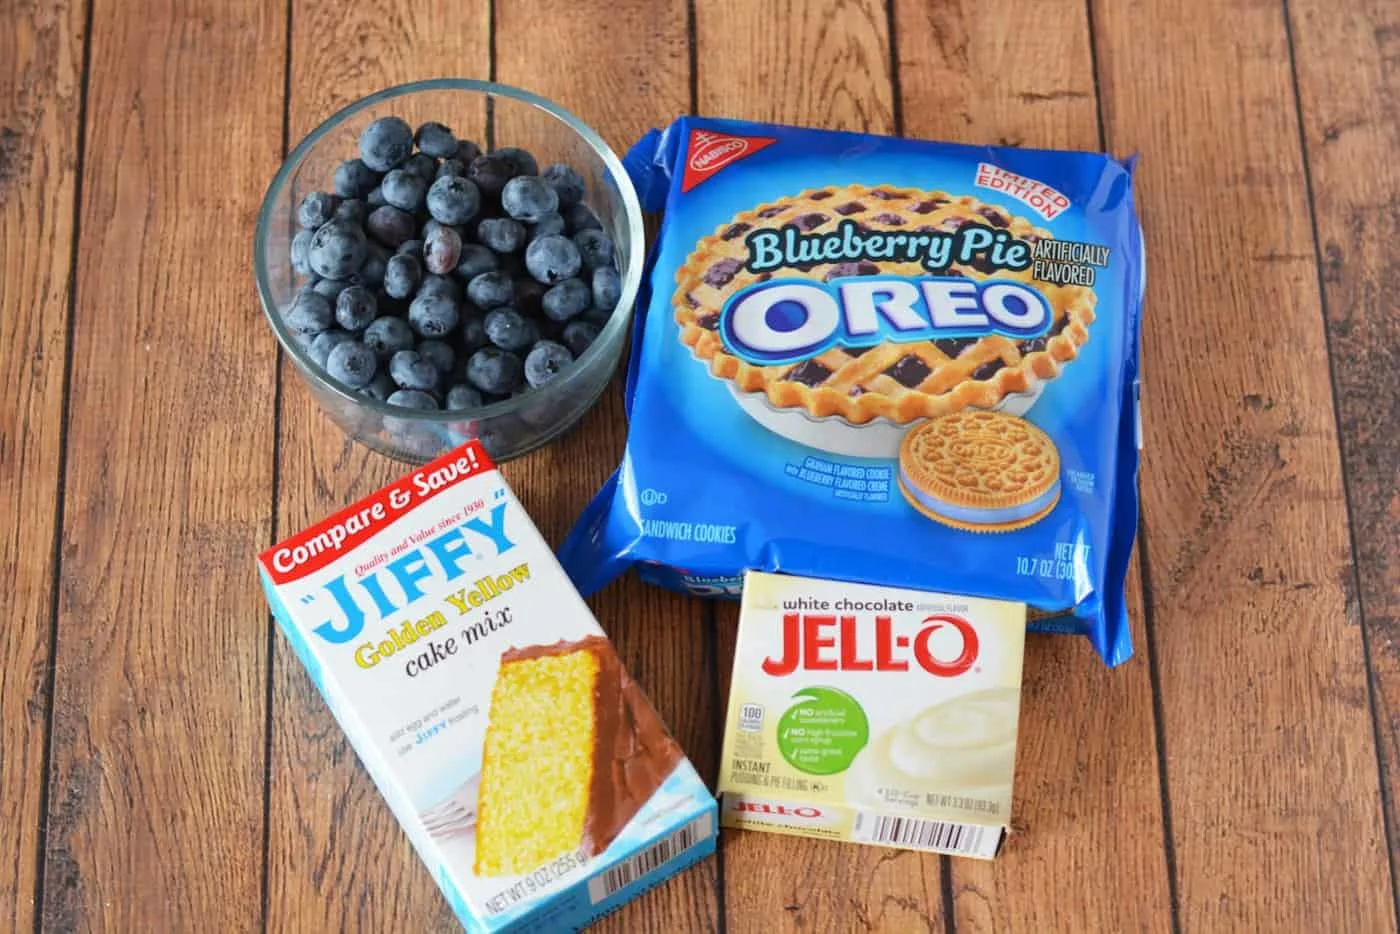 Jiffy Golden Yellow cake mix, white chocolate instant Jell-O pudding, blueberries, and Oreo cookies